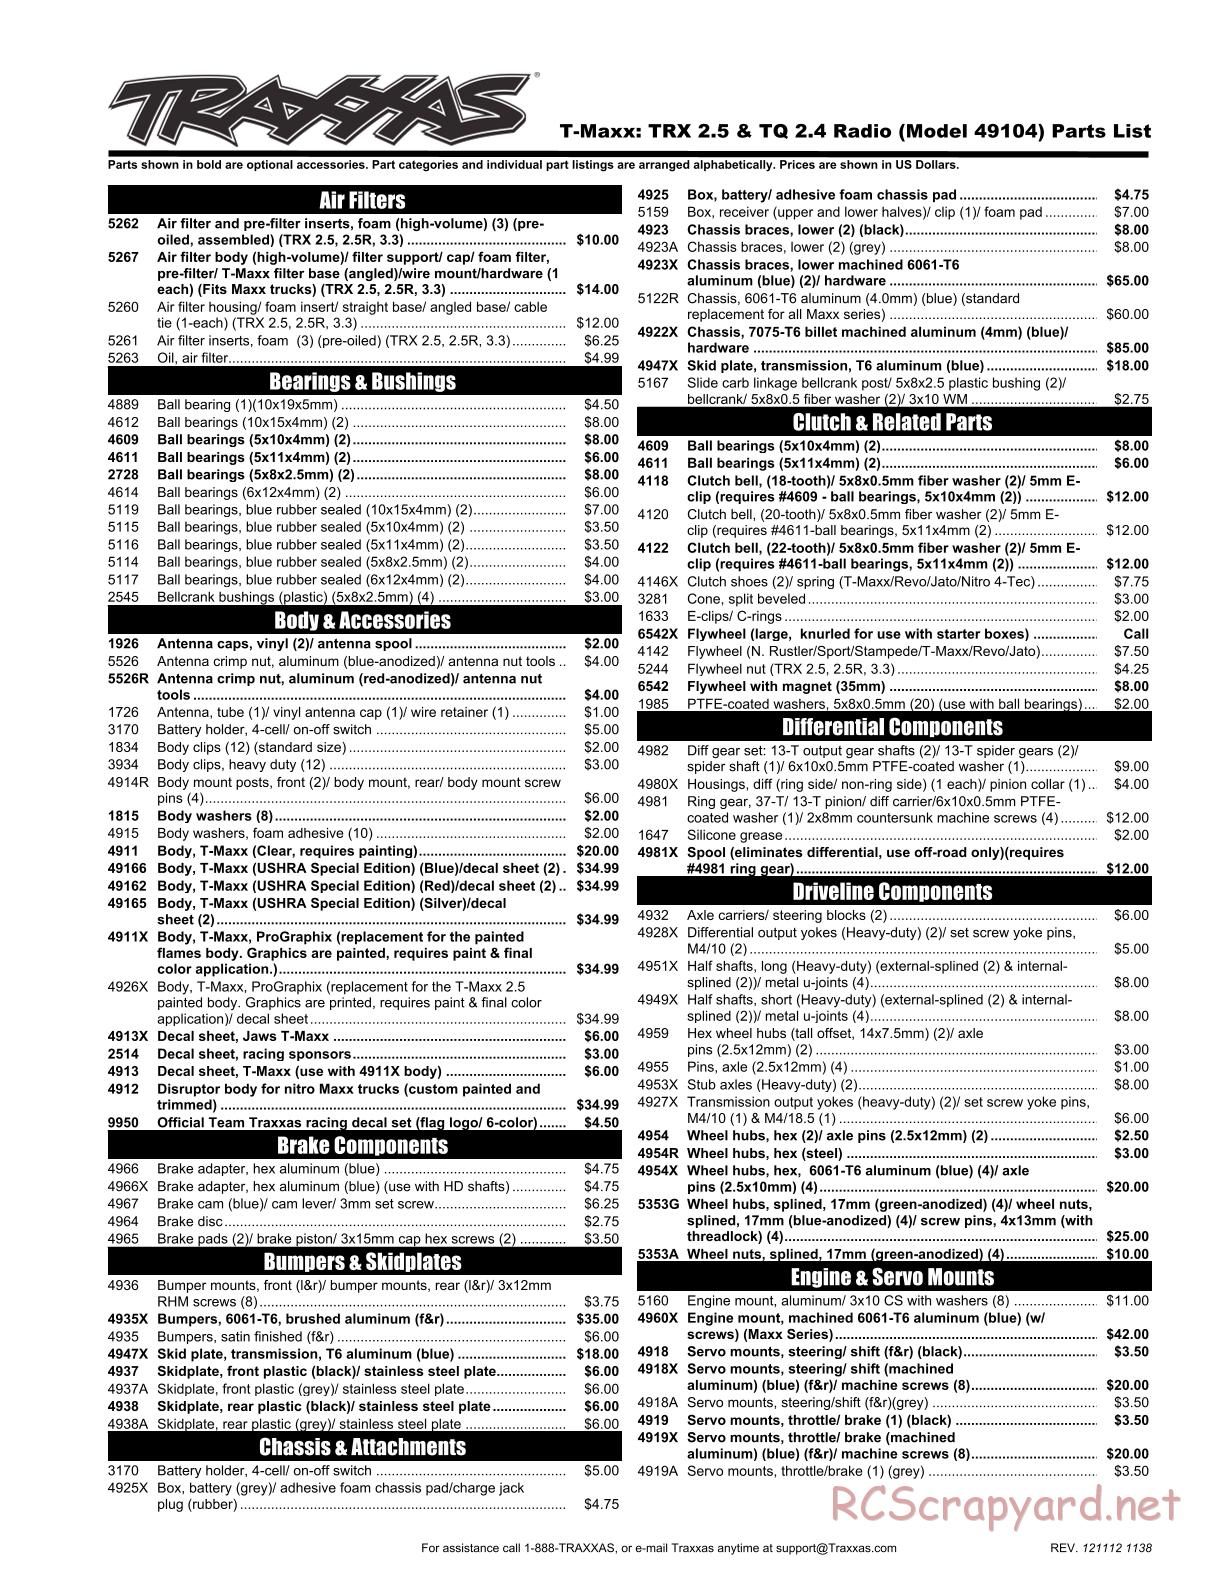 Traxxas - T-Maxx Classic (2013) - Parts List - Page 1